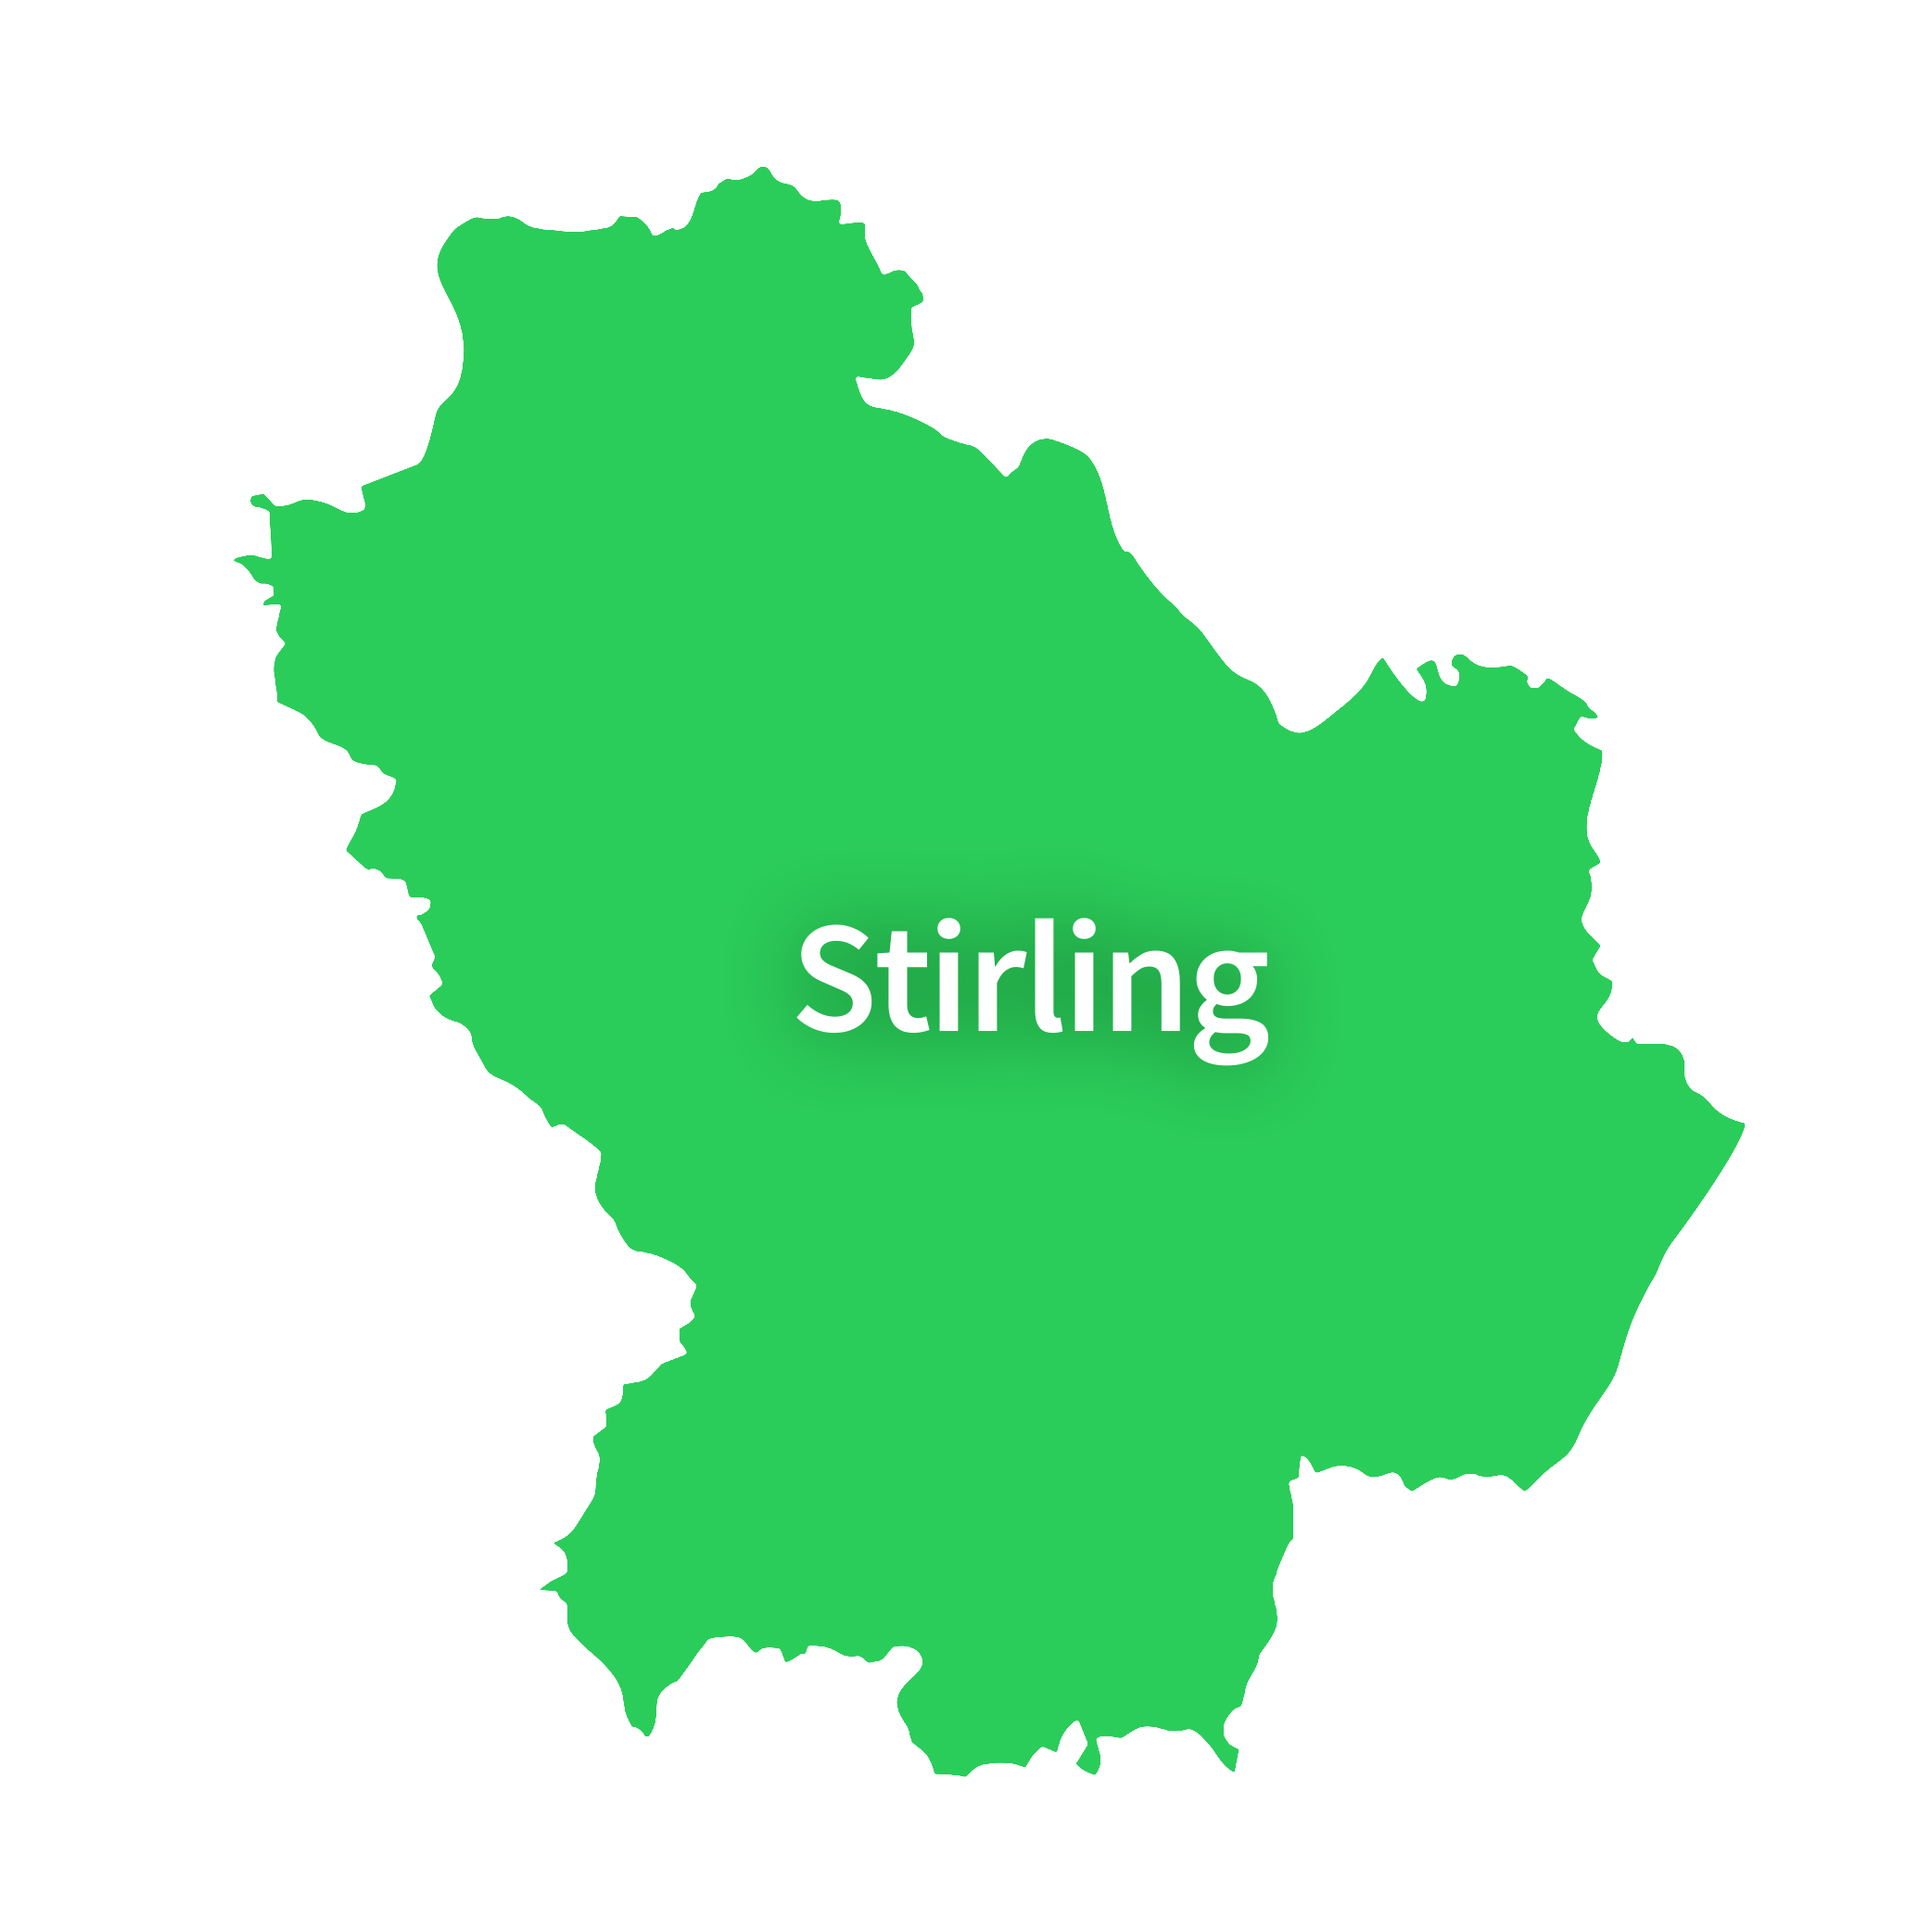 Map of Stirling